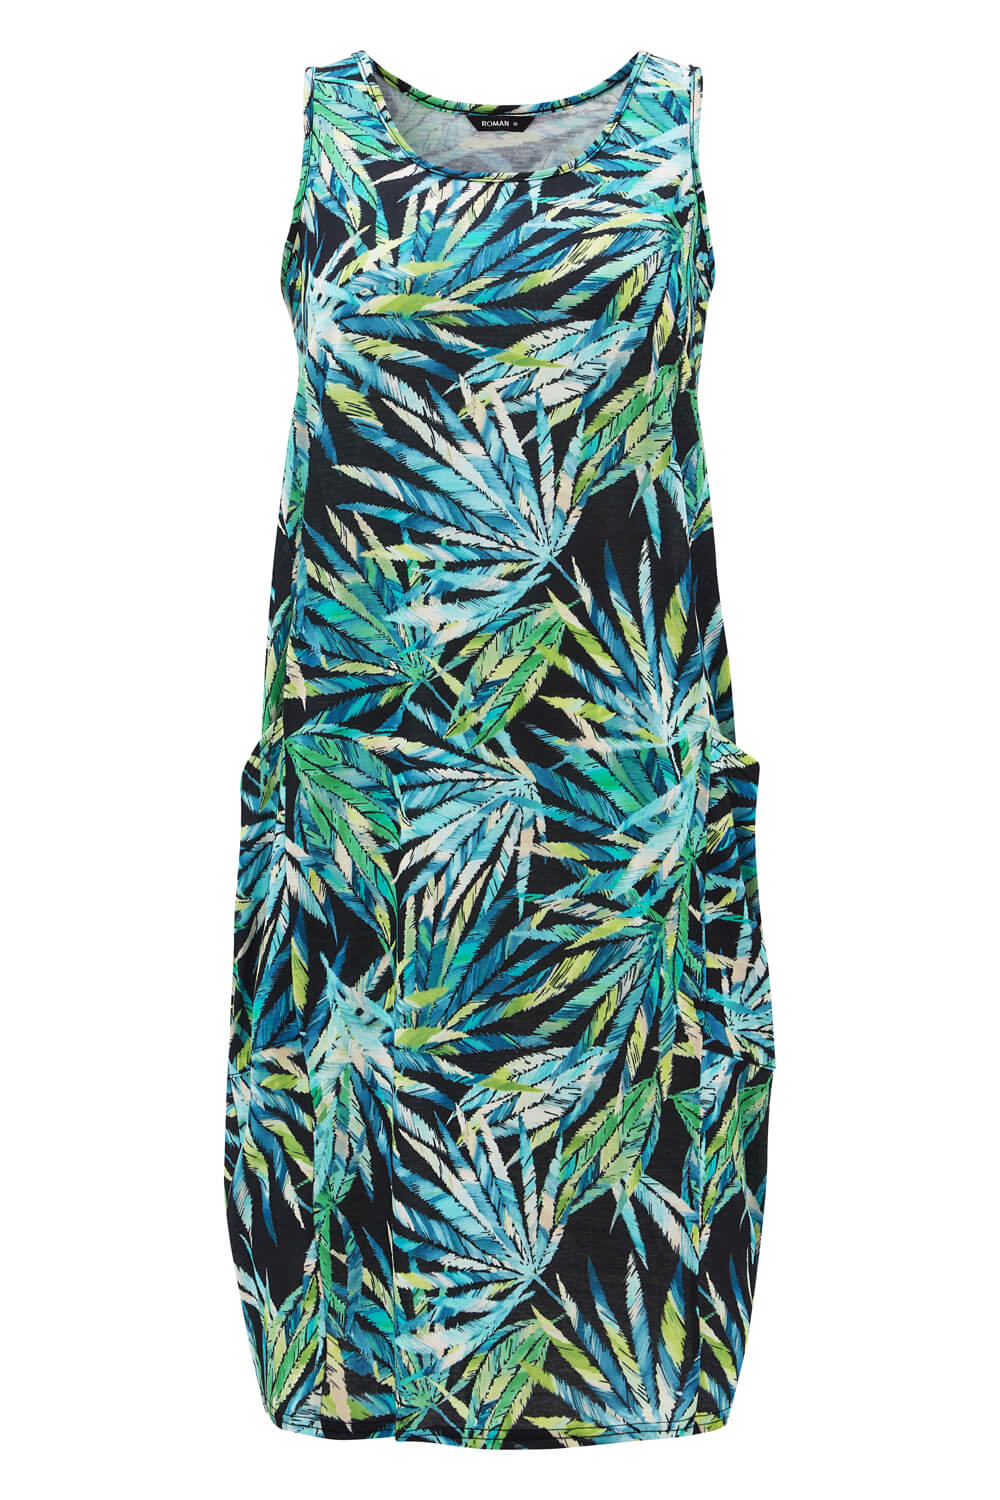 Green Leaf Print Slouch Dress, Image 5 of 5